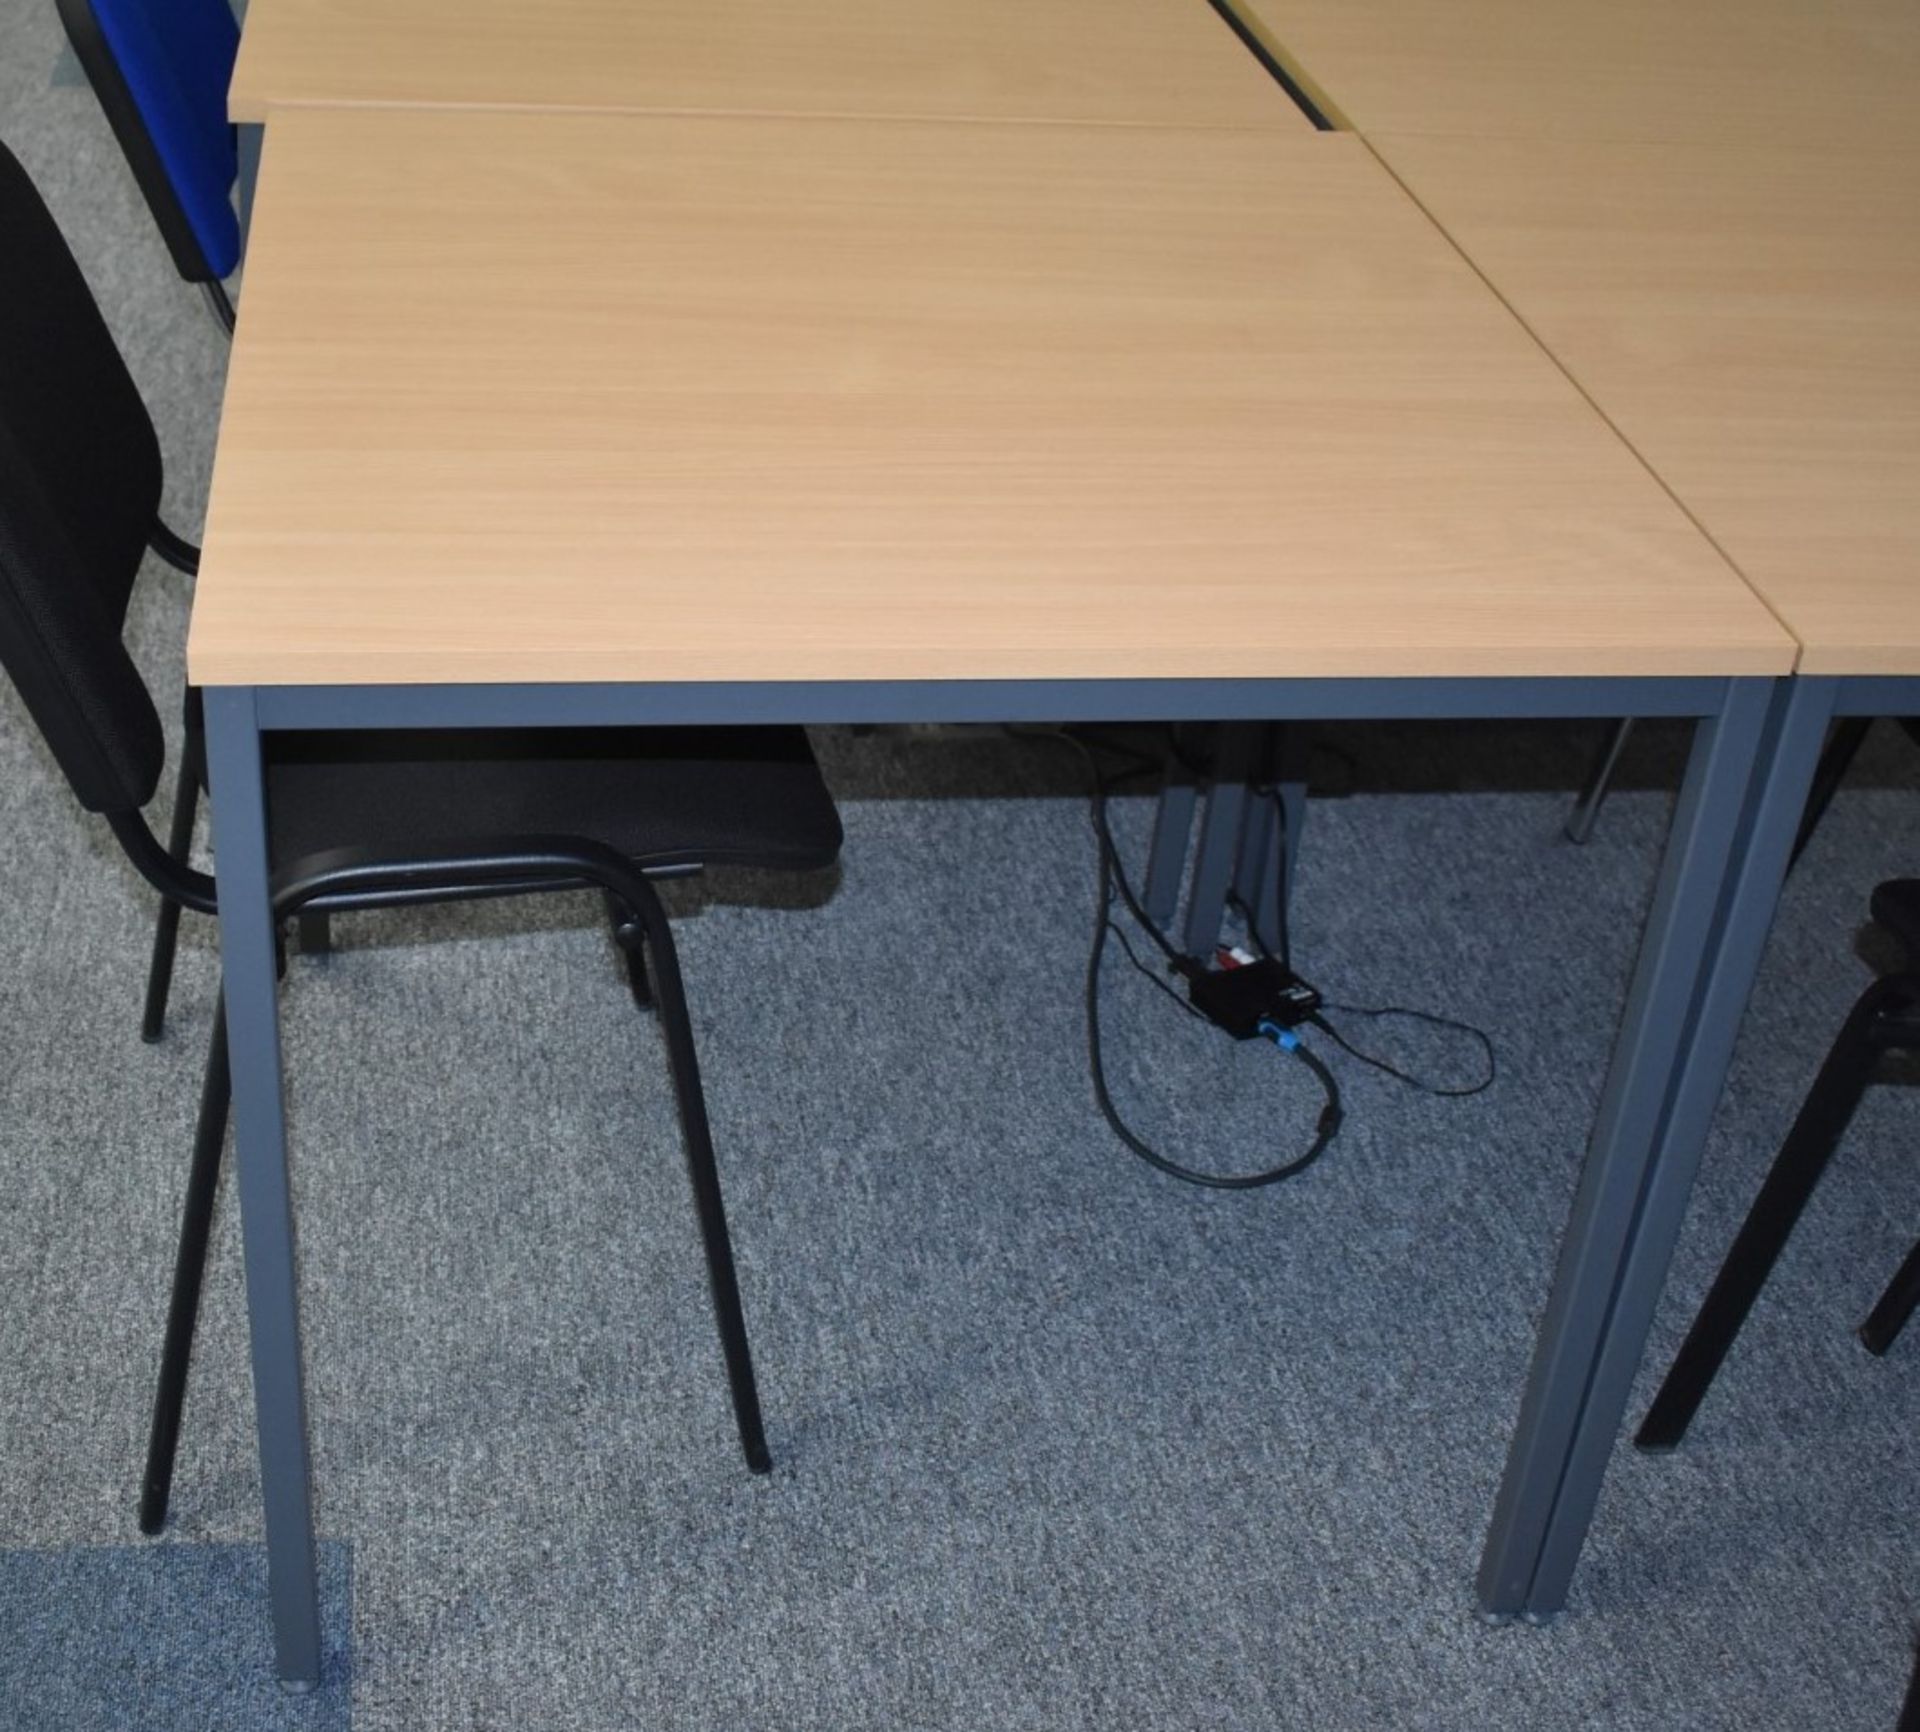 6 x Matching Office Tables With Beech Tops and Dark Grey Bases - CL490 - Location: Putney, London, - Image 3 of 3